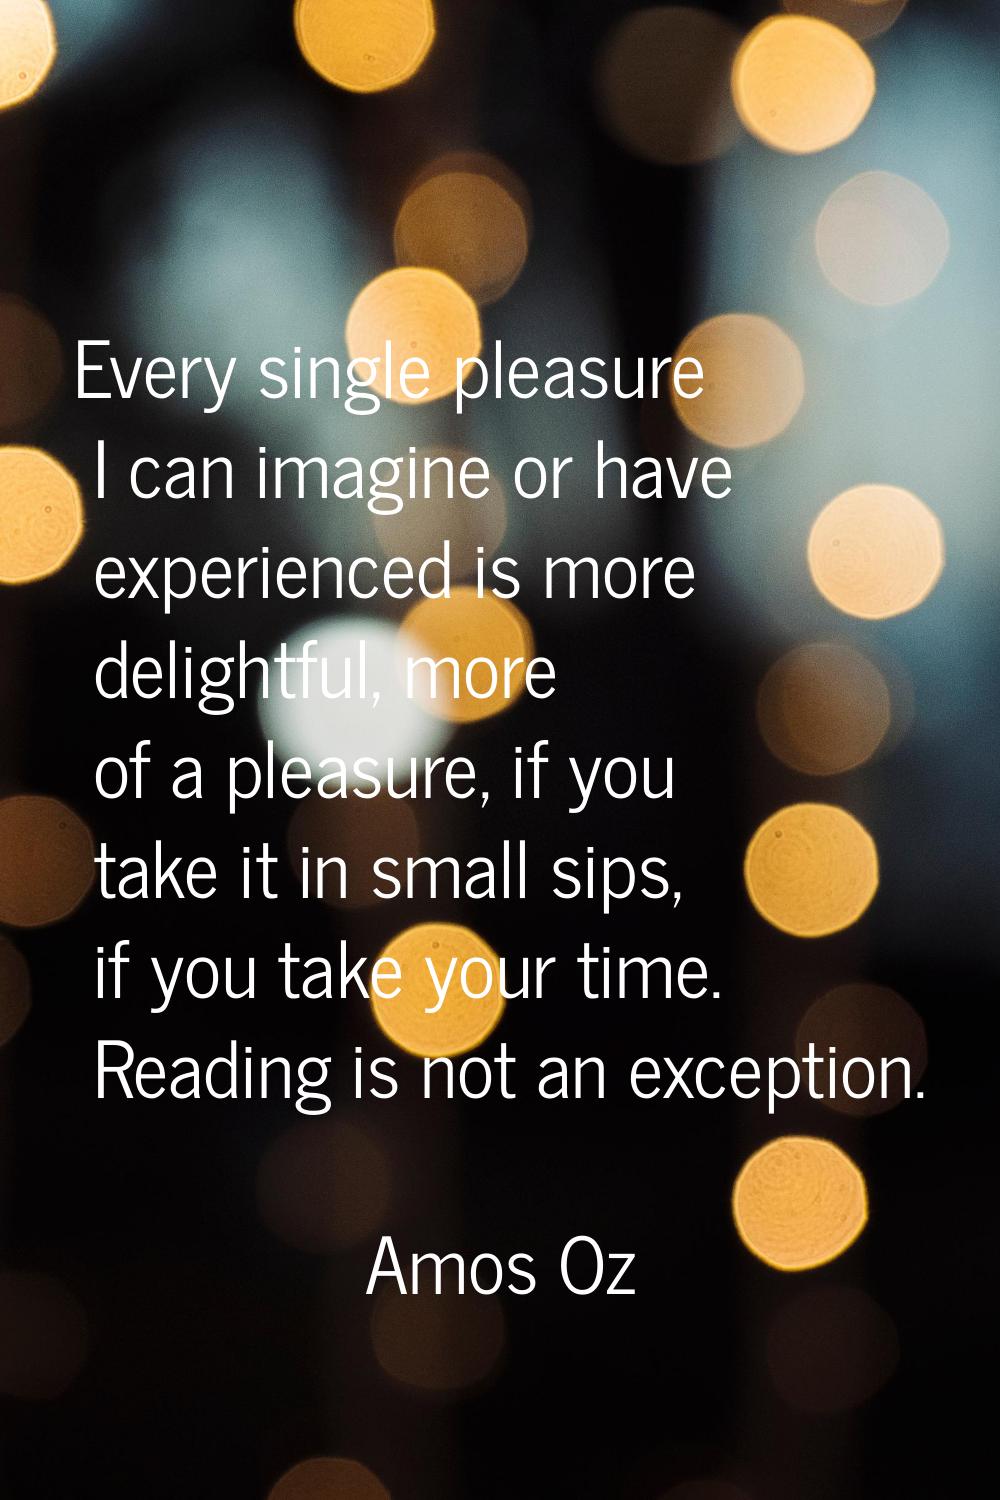 Every single pleasure I can imagine or have experienced is more delightful, more of a pleasure, if 